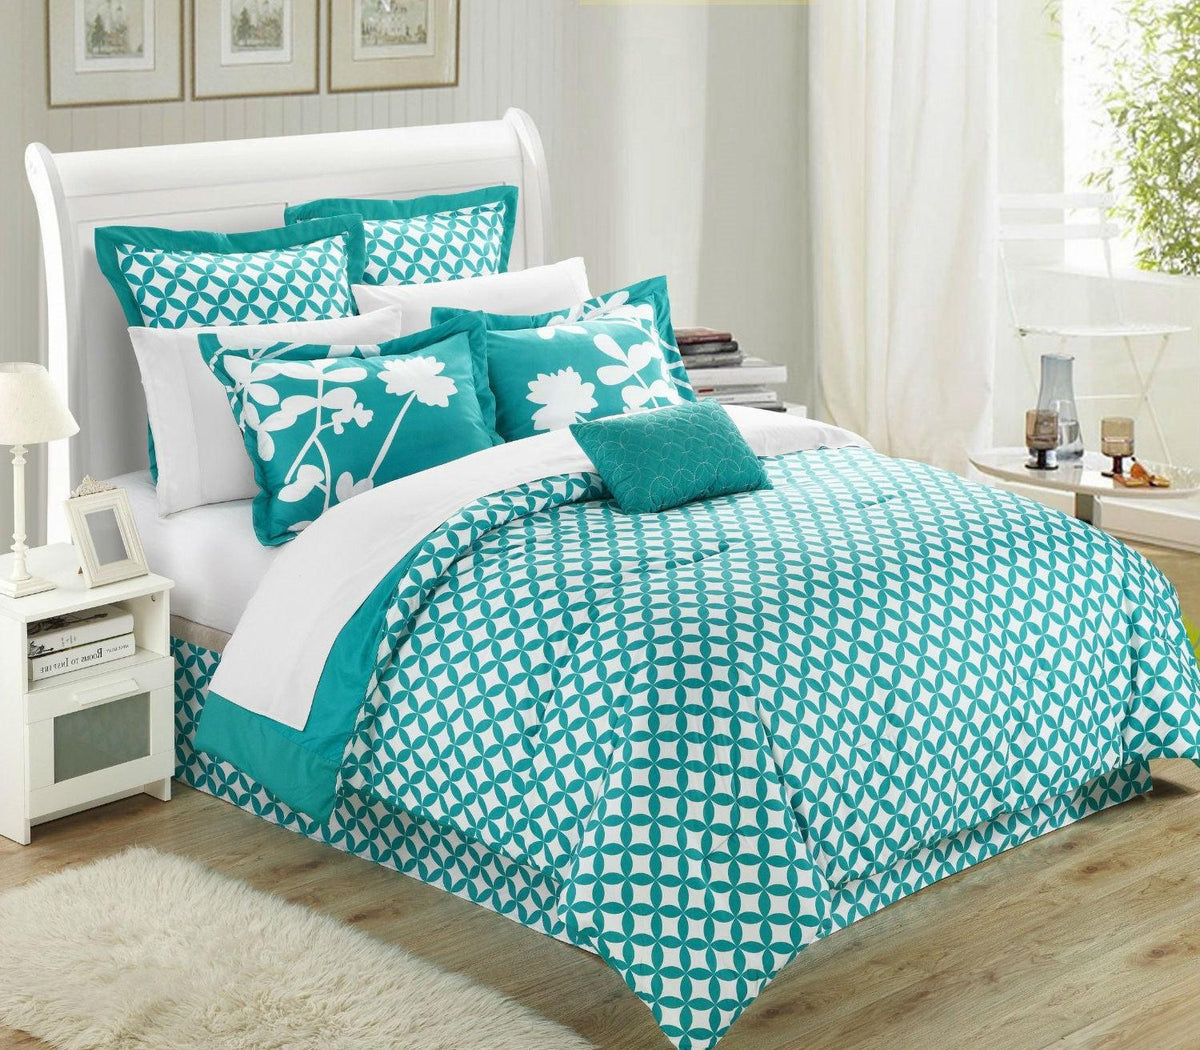 Queen size Turquoise 7-Piece Floral Bed in a Bag Comforter Set